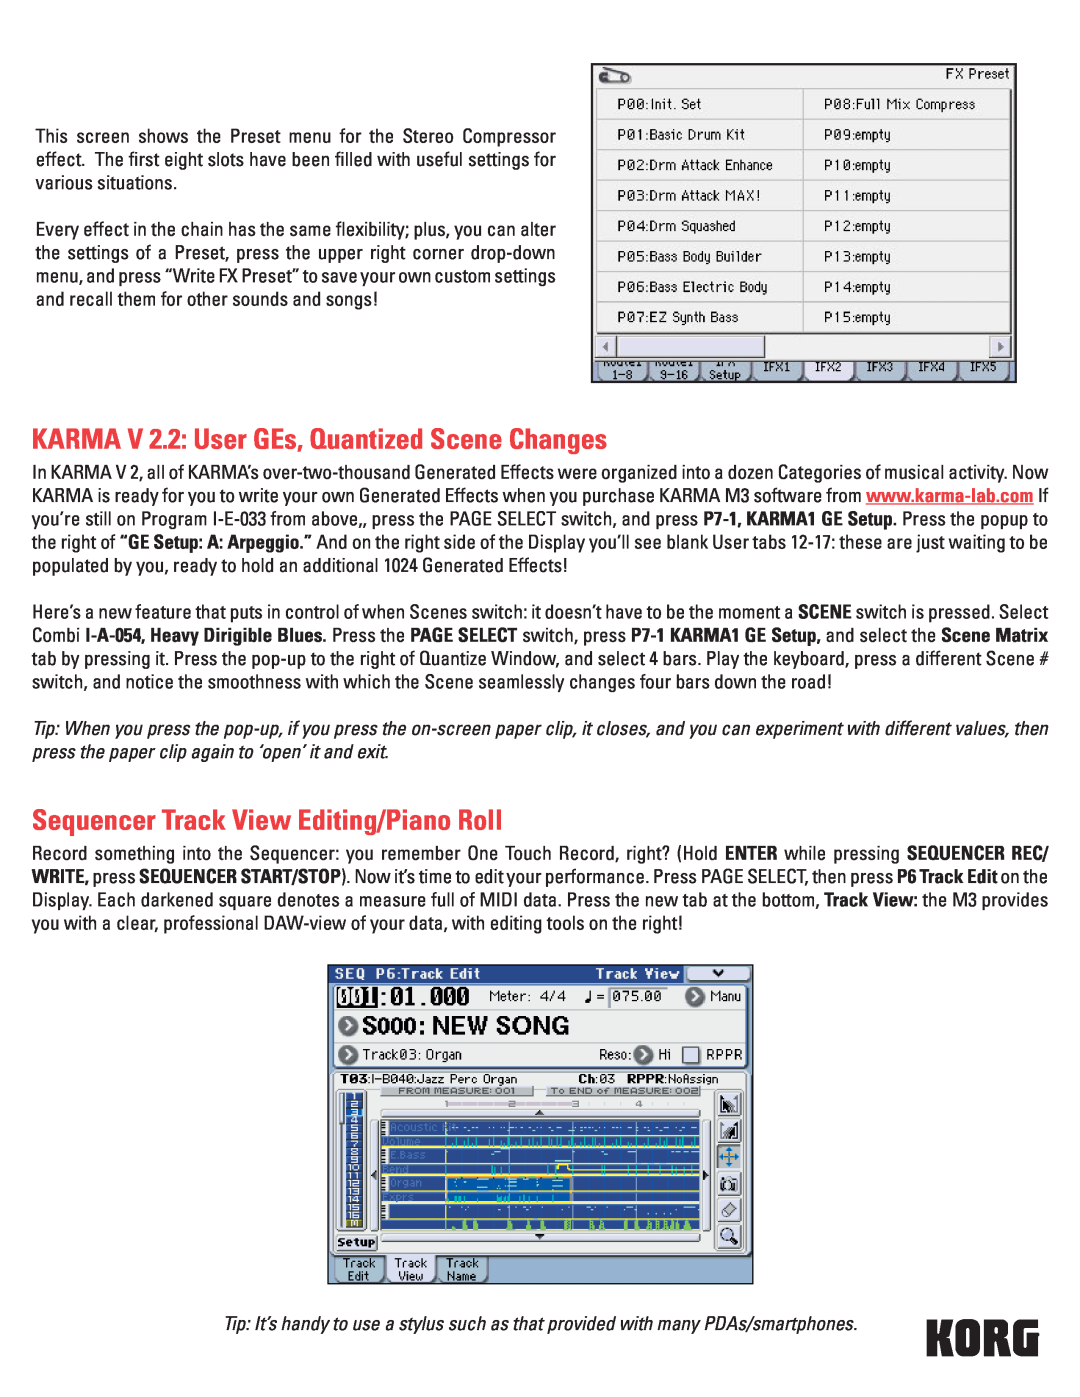 Korg M3 manual KARMA V 2.2 User GEs, Quantized Scene Changes, Sequencer Track View Editing/Piano Roll 